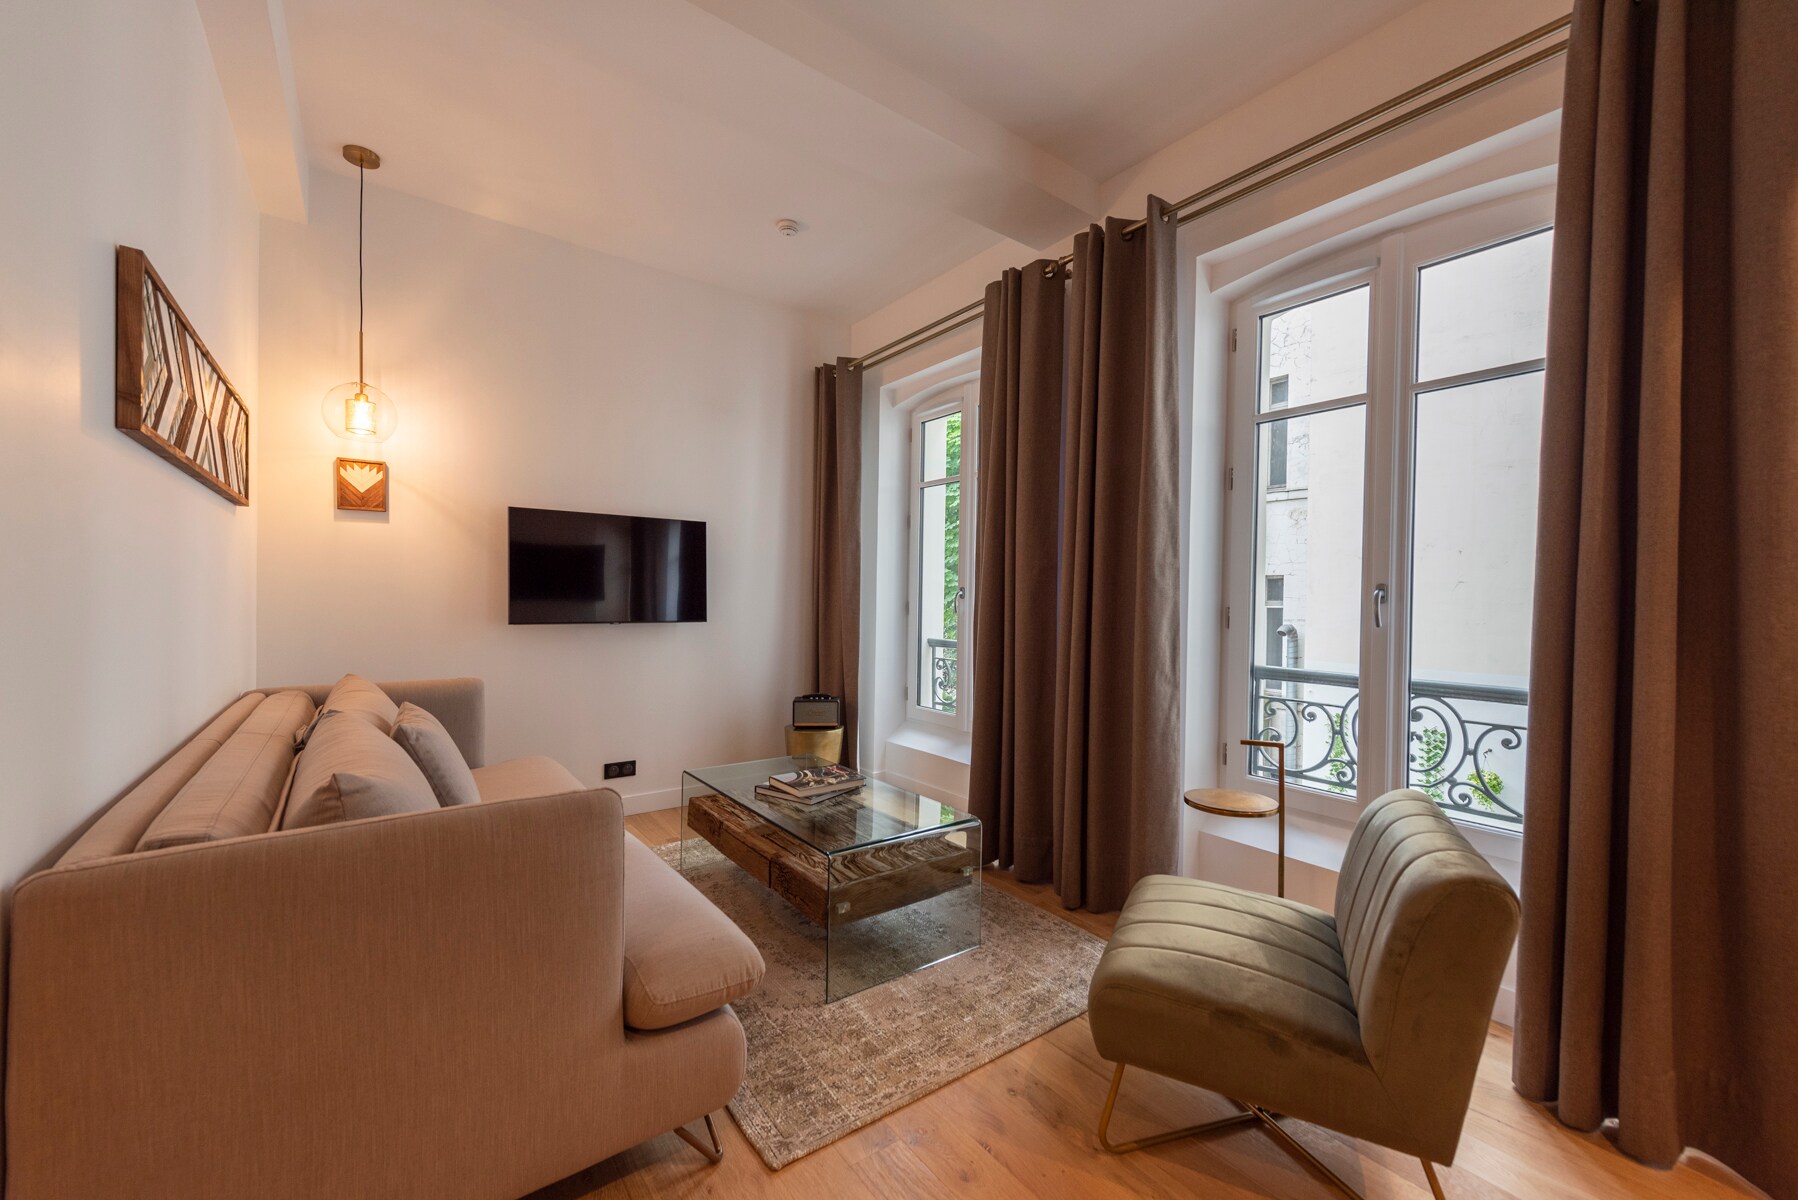 Property Image 1 - First floor flat with high ceilings near the Champs-Elysees